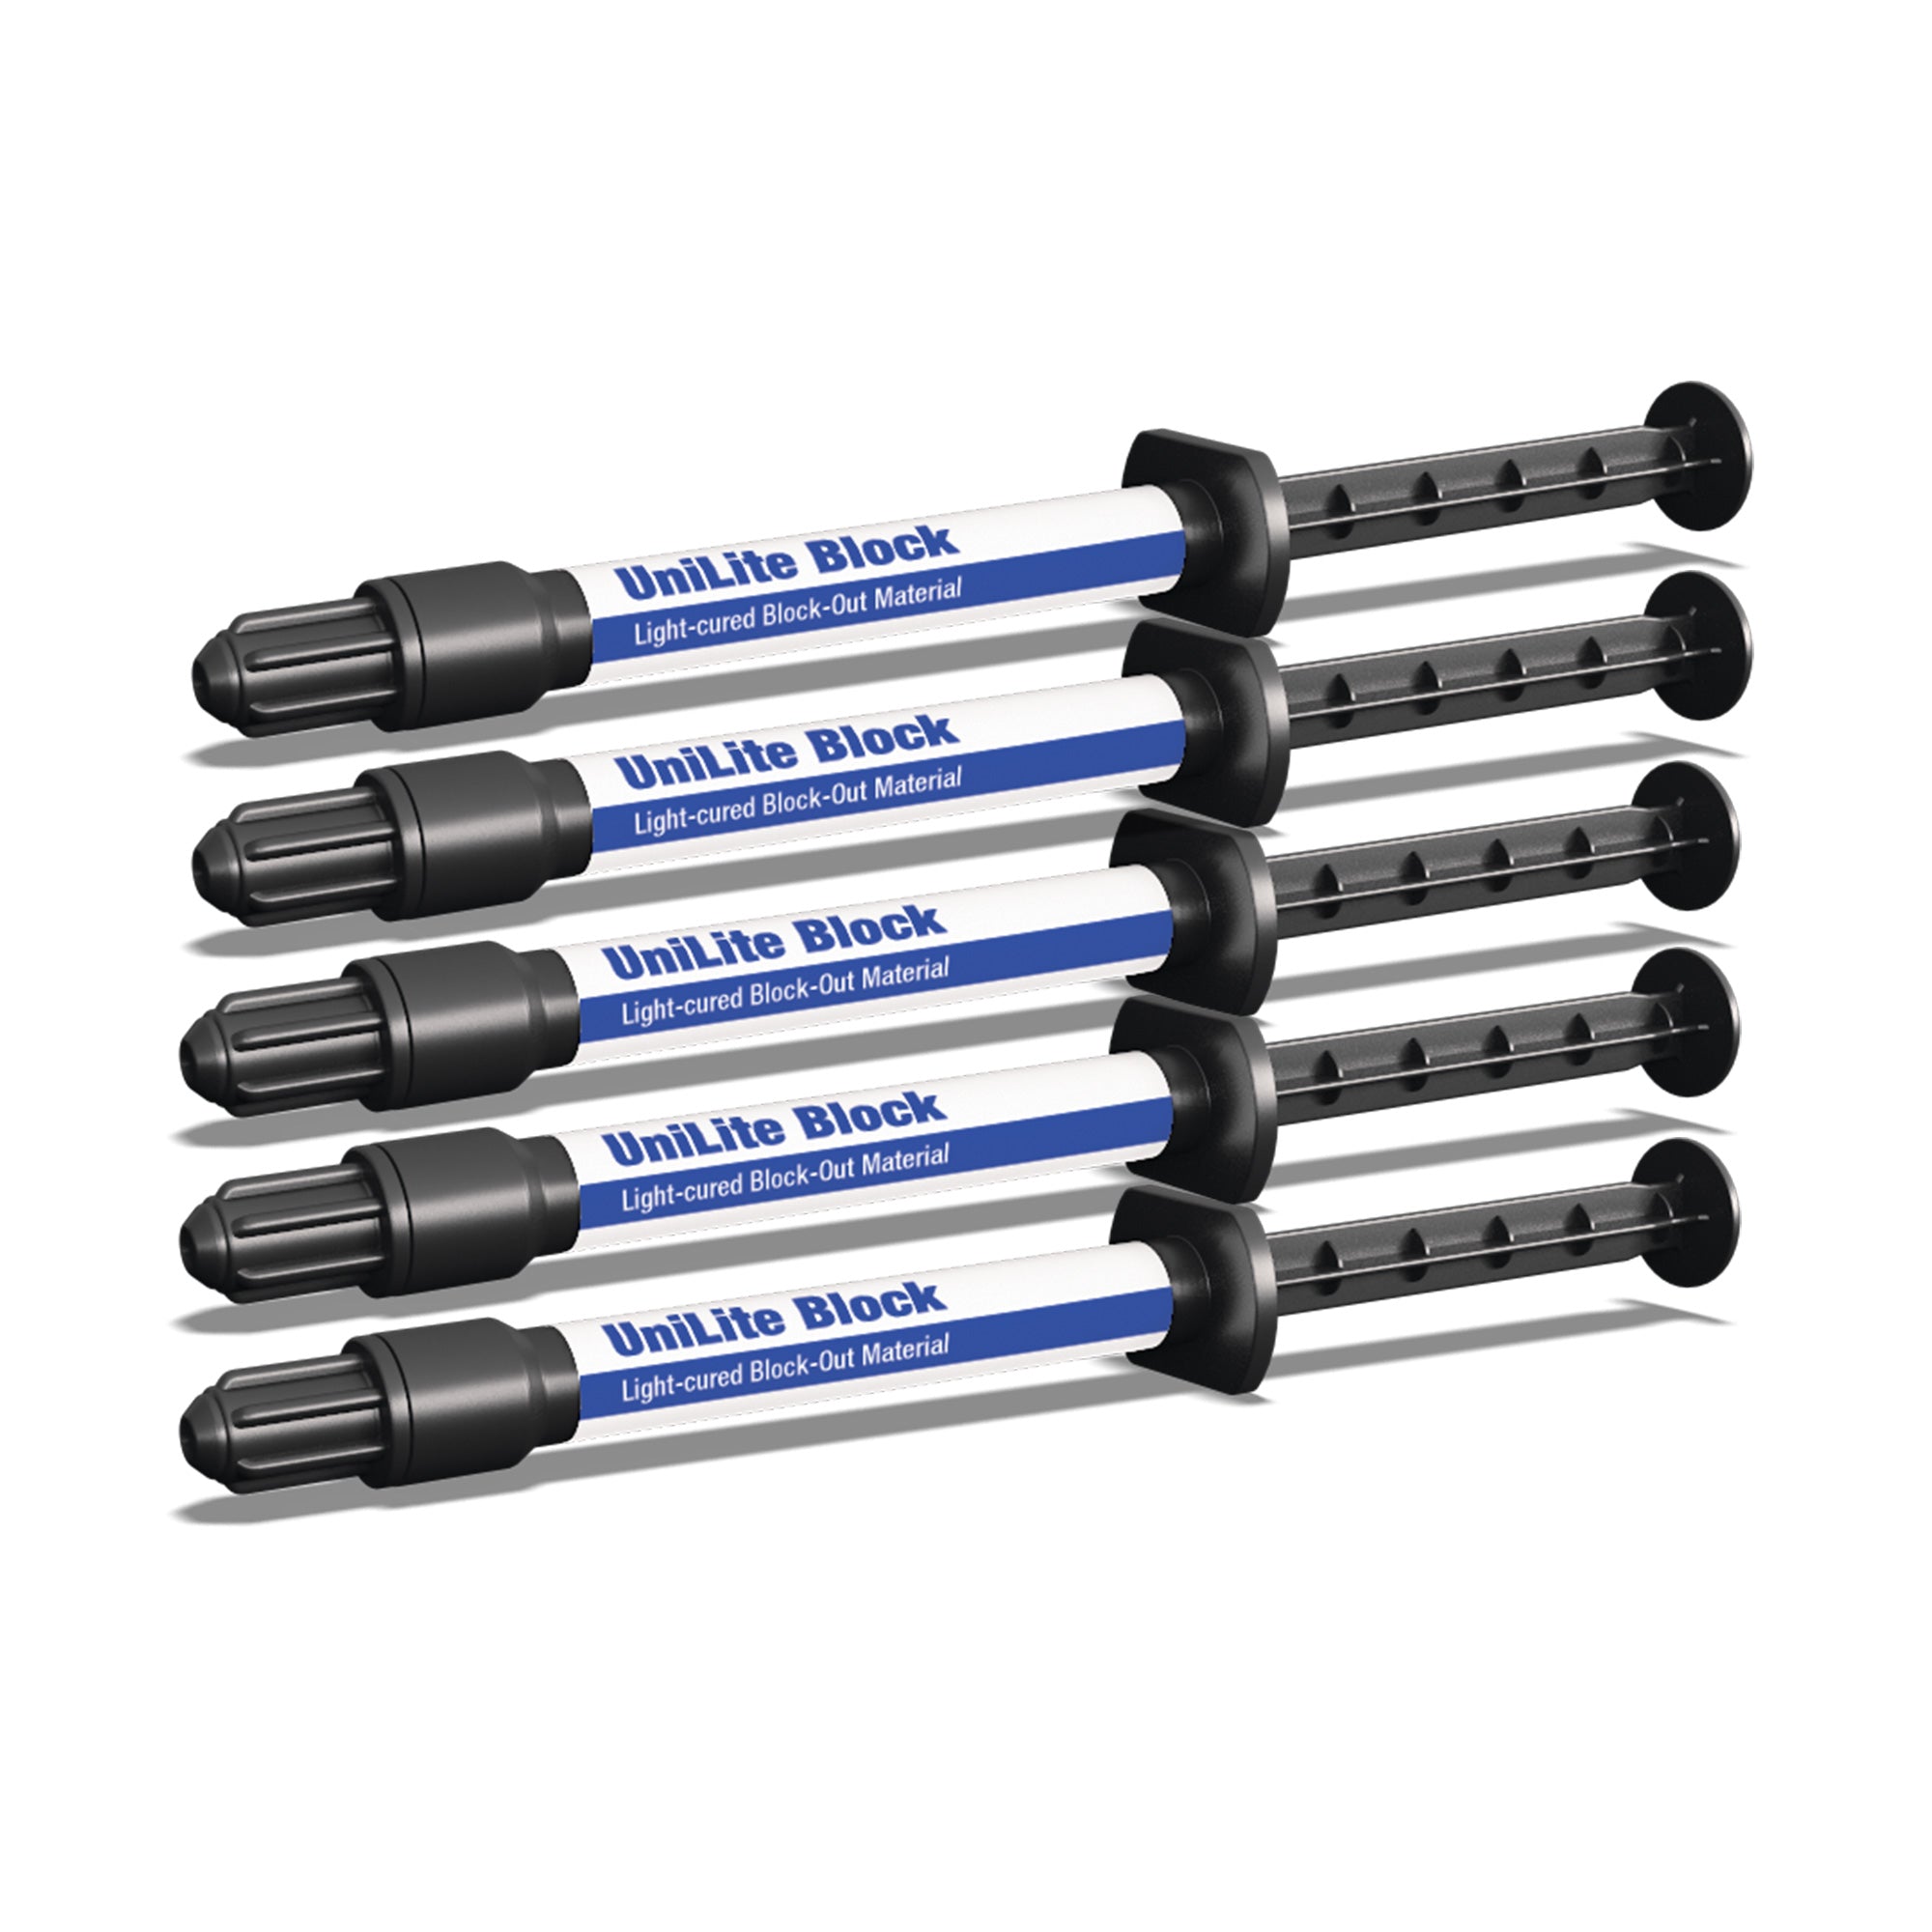 DSI UniLite Block-Out Resin Material 5x Syringes 2g each